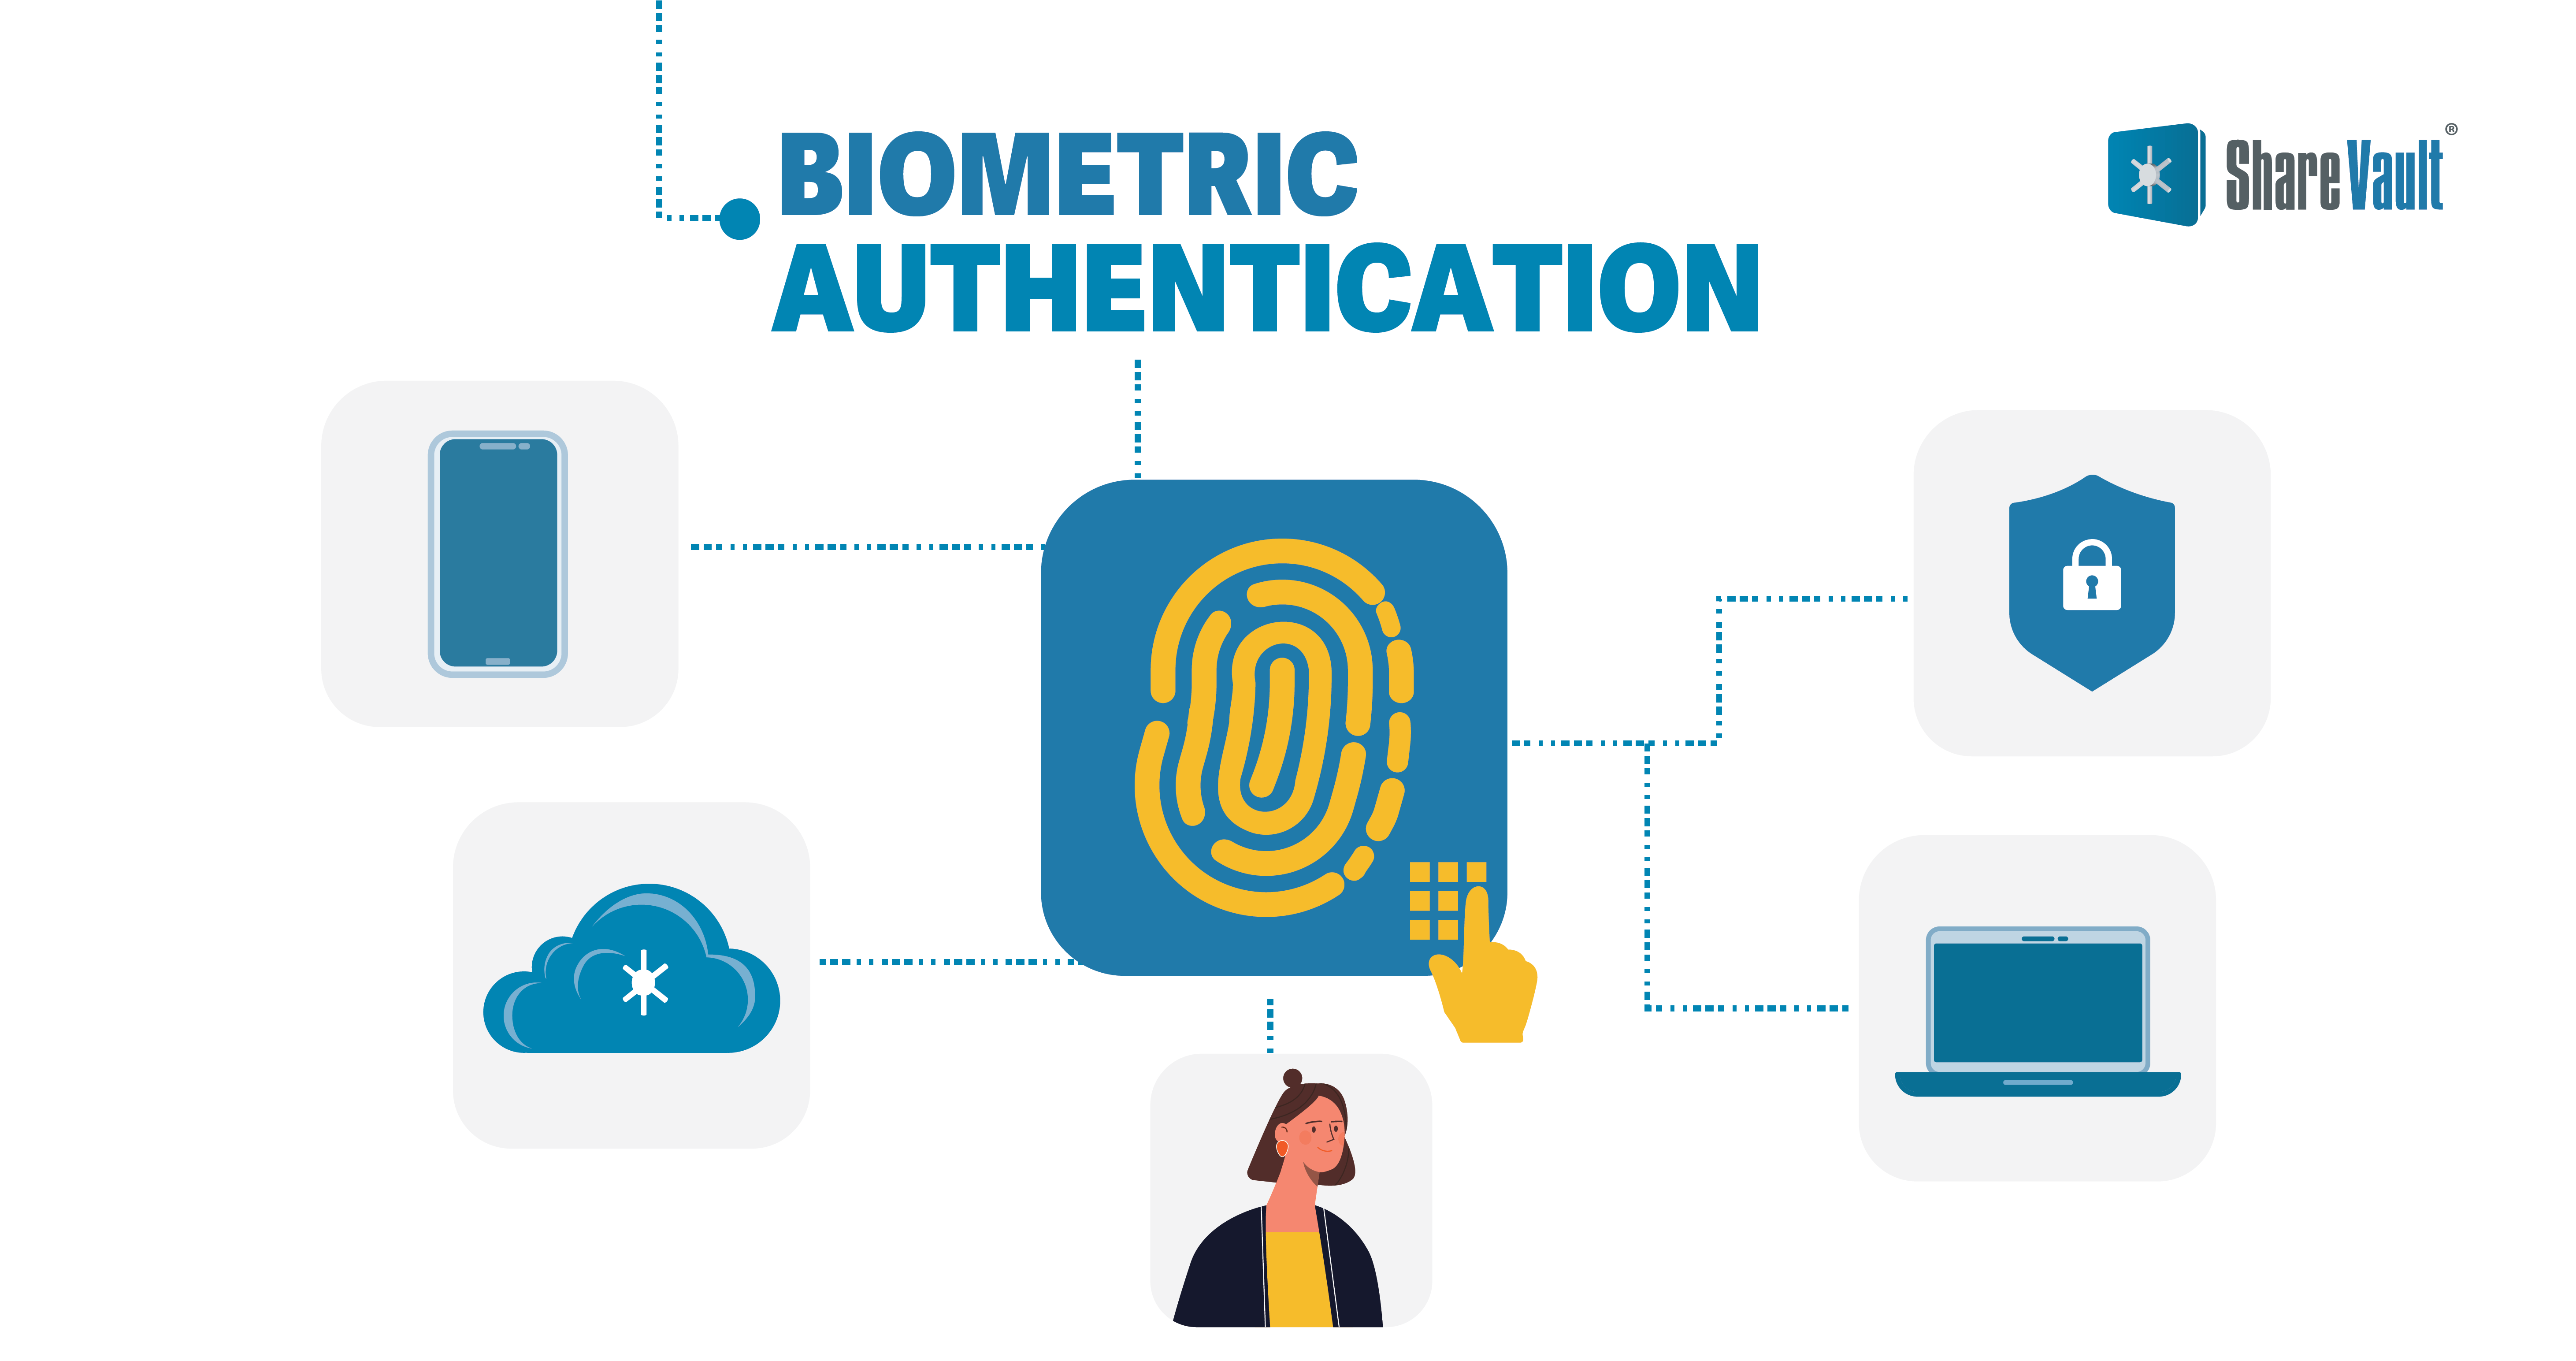 VDR for biometric authentication